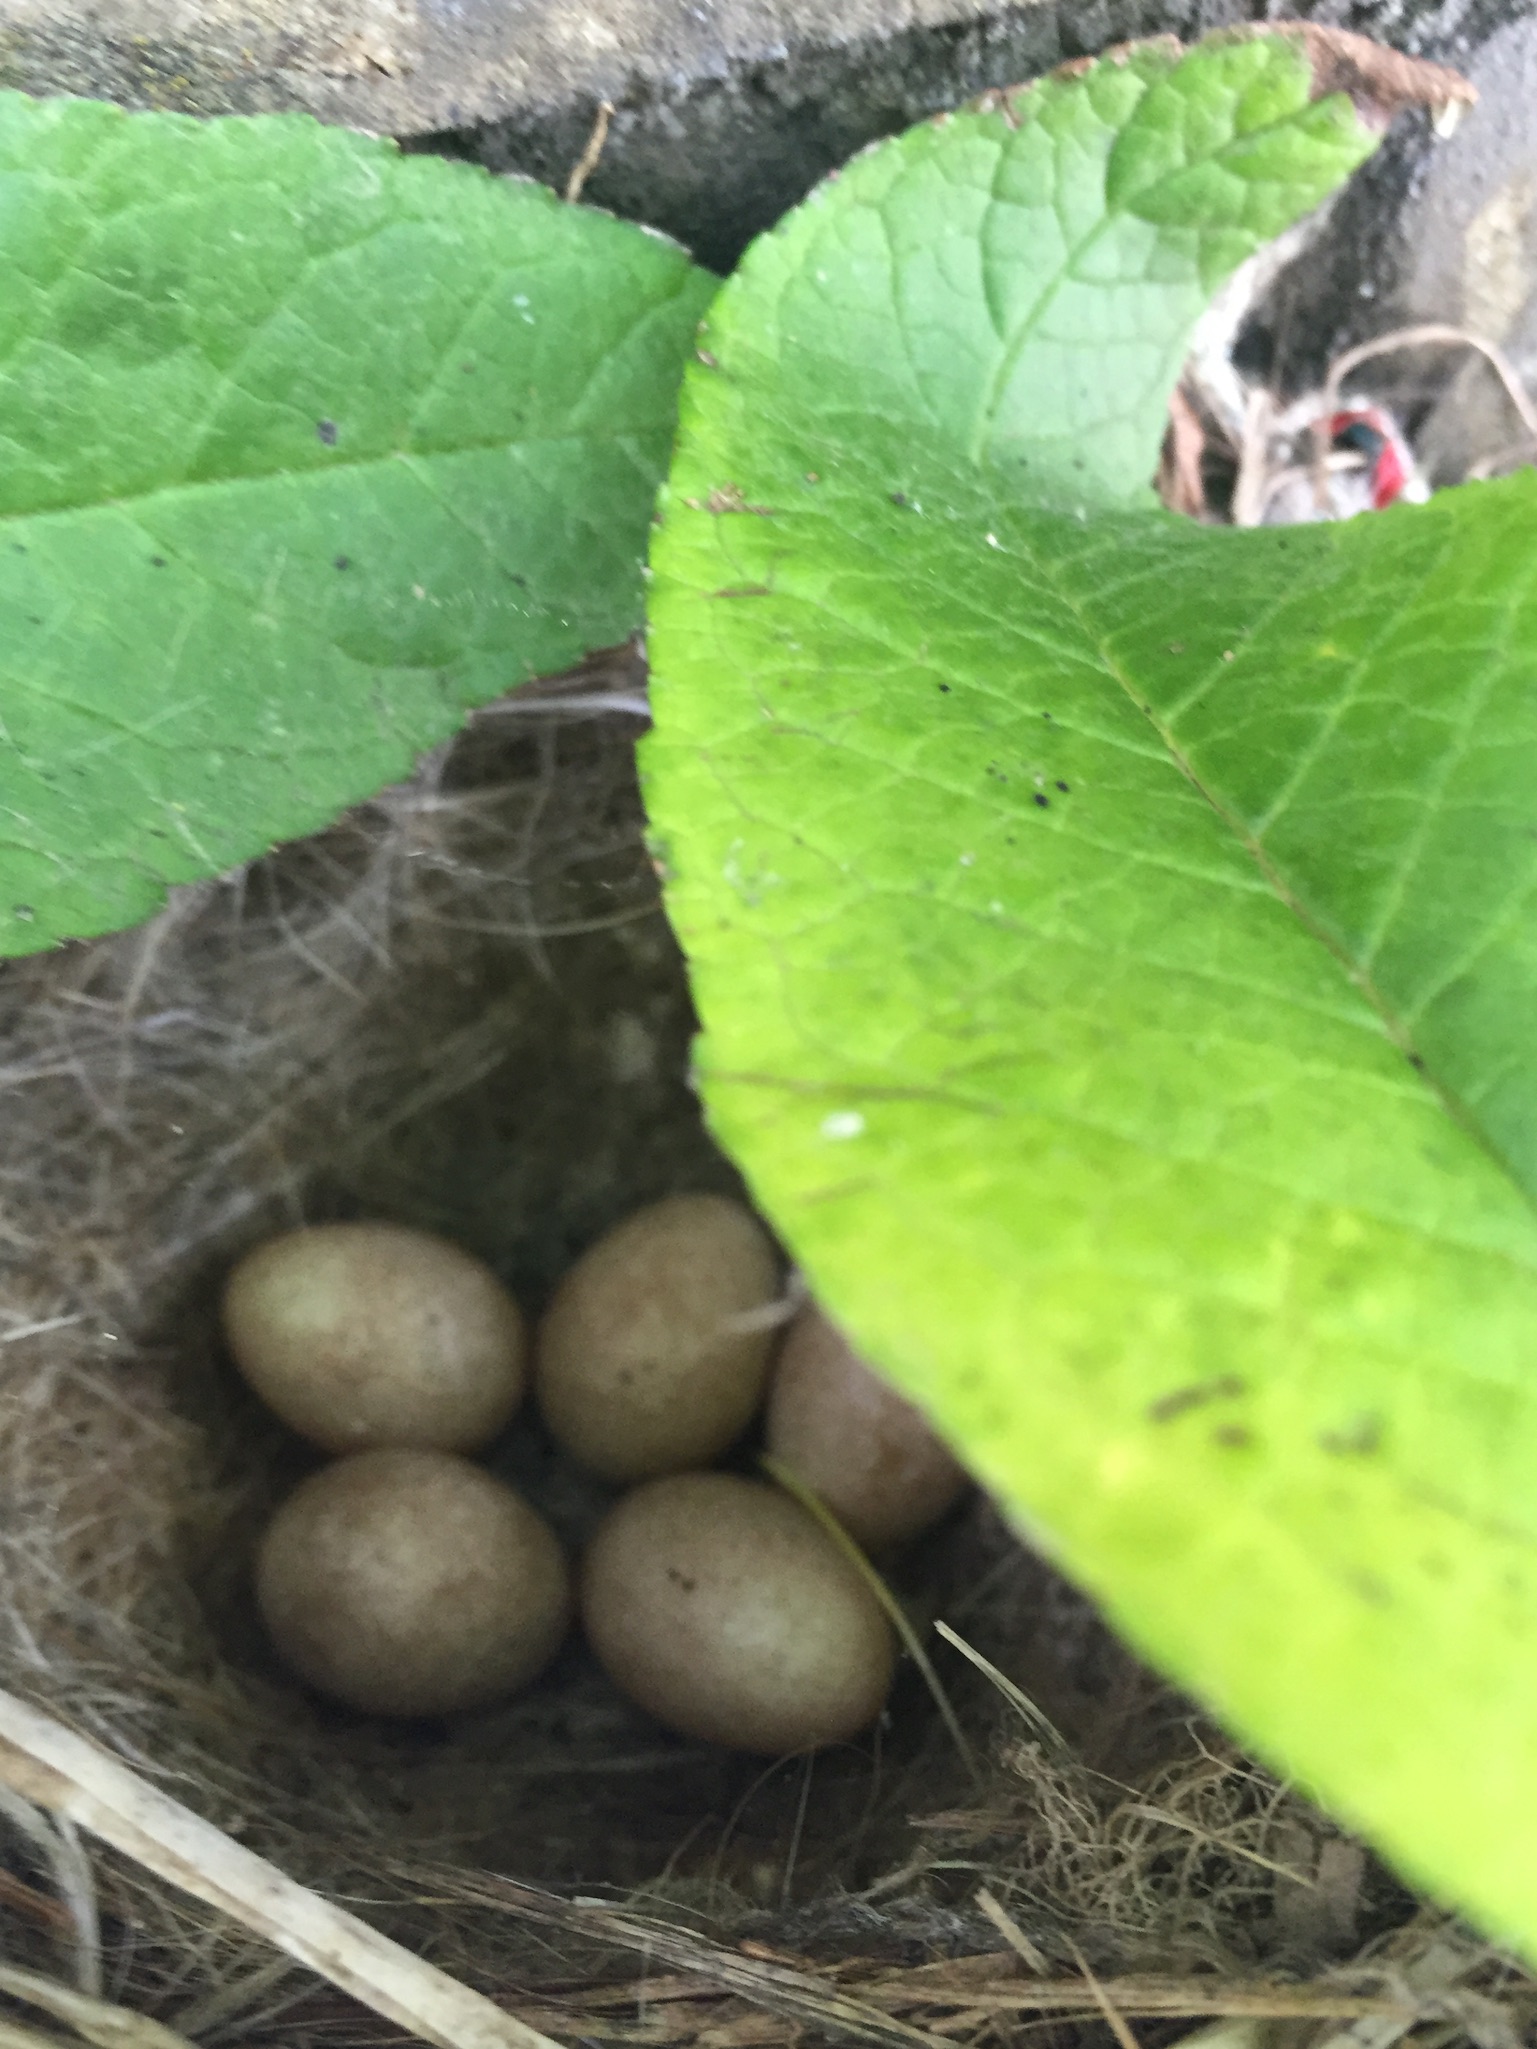 Eggs from a Grey Wagtail. Regular resident of The Studio.